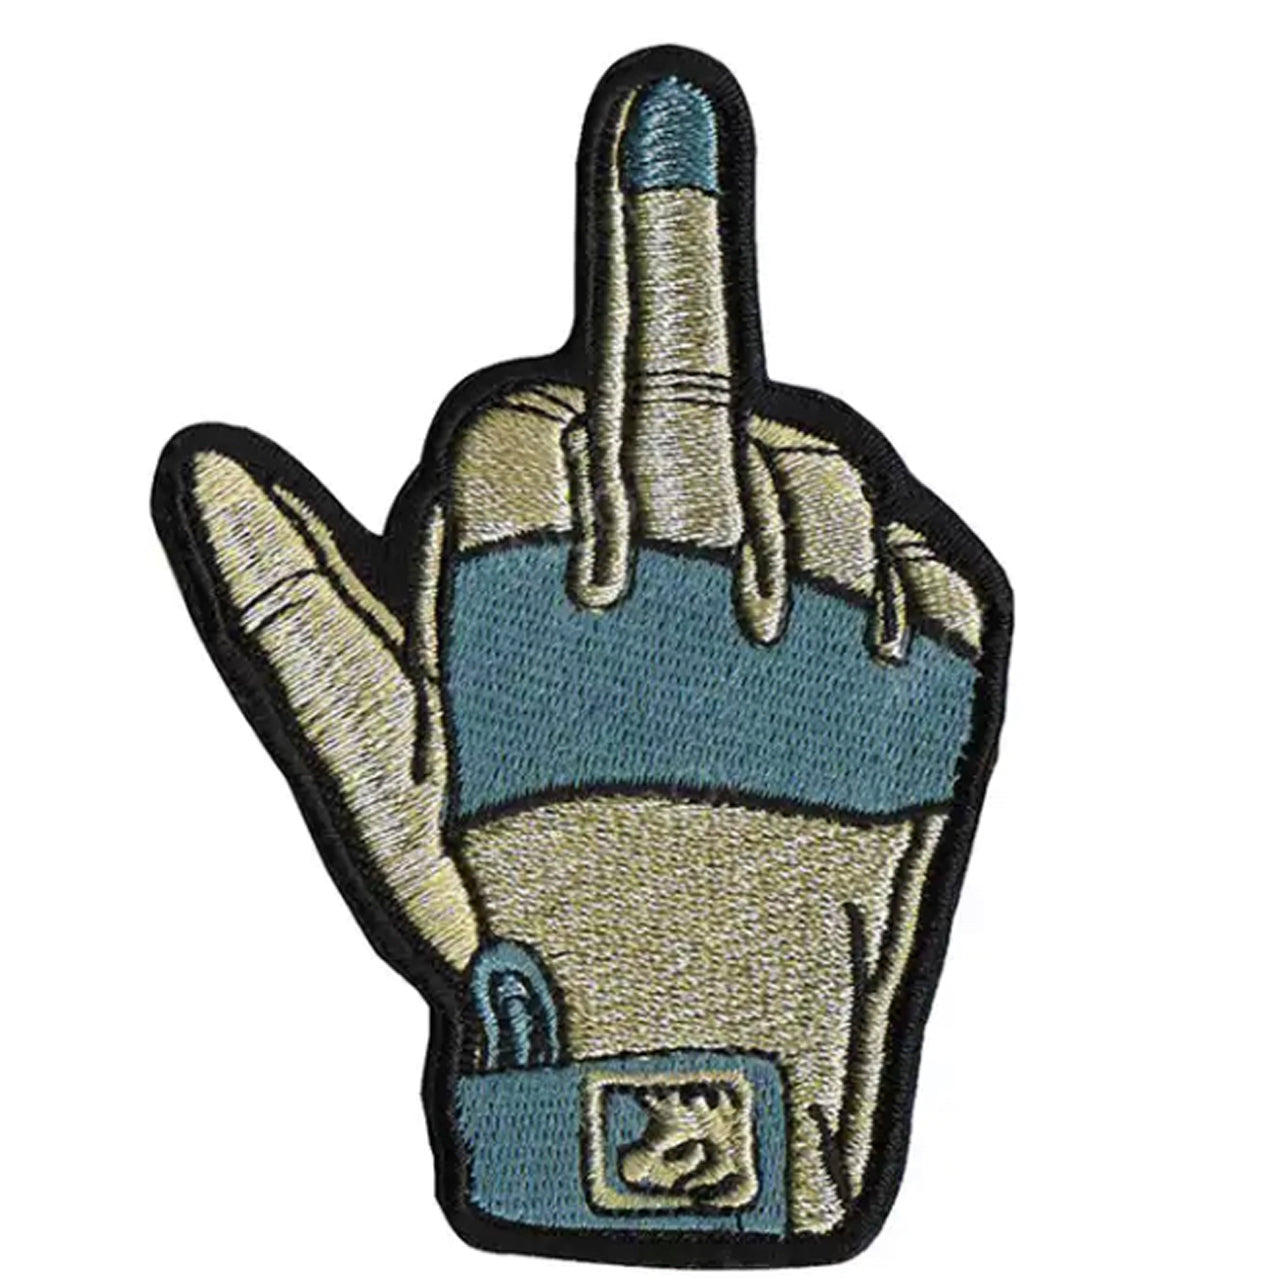 The Finger Patch Iron On 9x6cm www.moralepatches.com.au